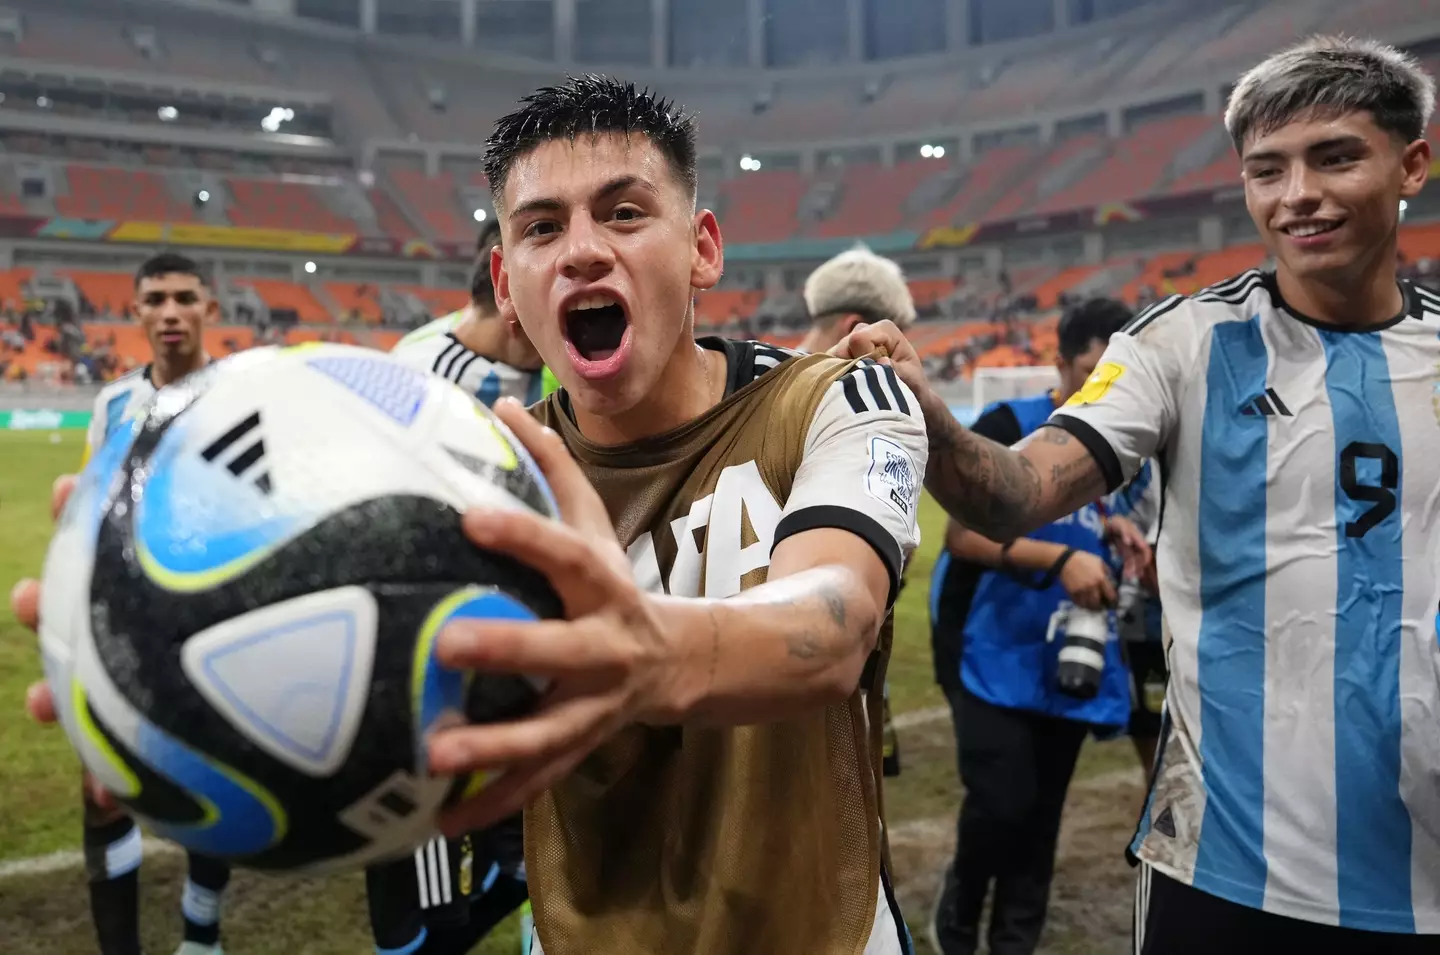 Echeverri with his match ball after his hat-trick against Brazil. (Image